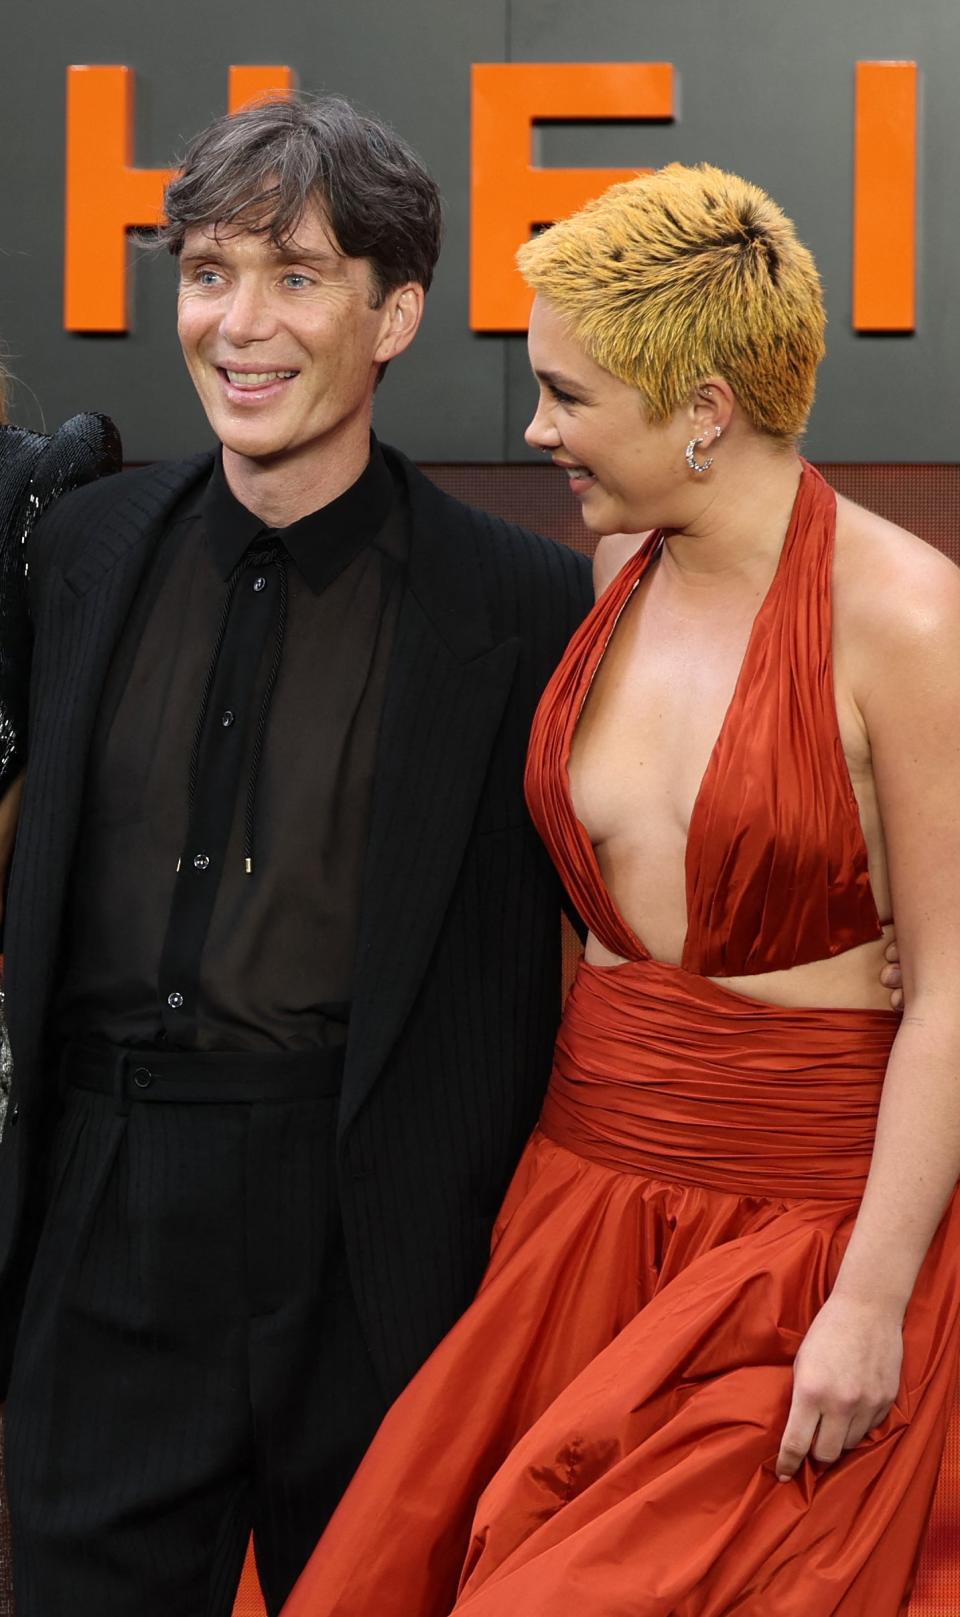 Cillian and Florence smiling on the red carpet